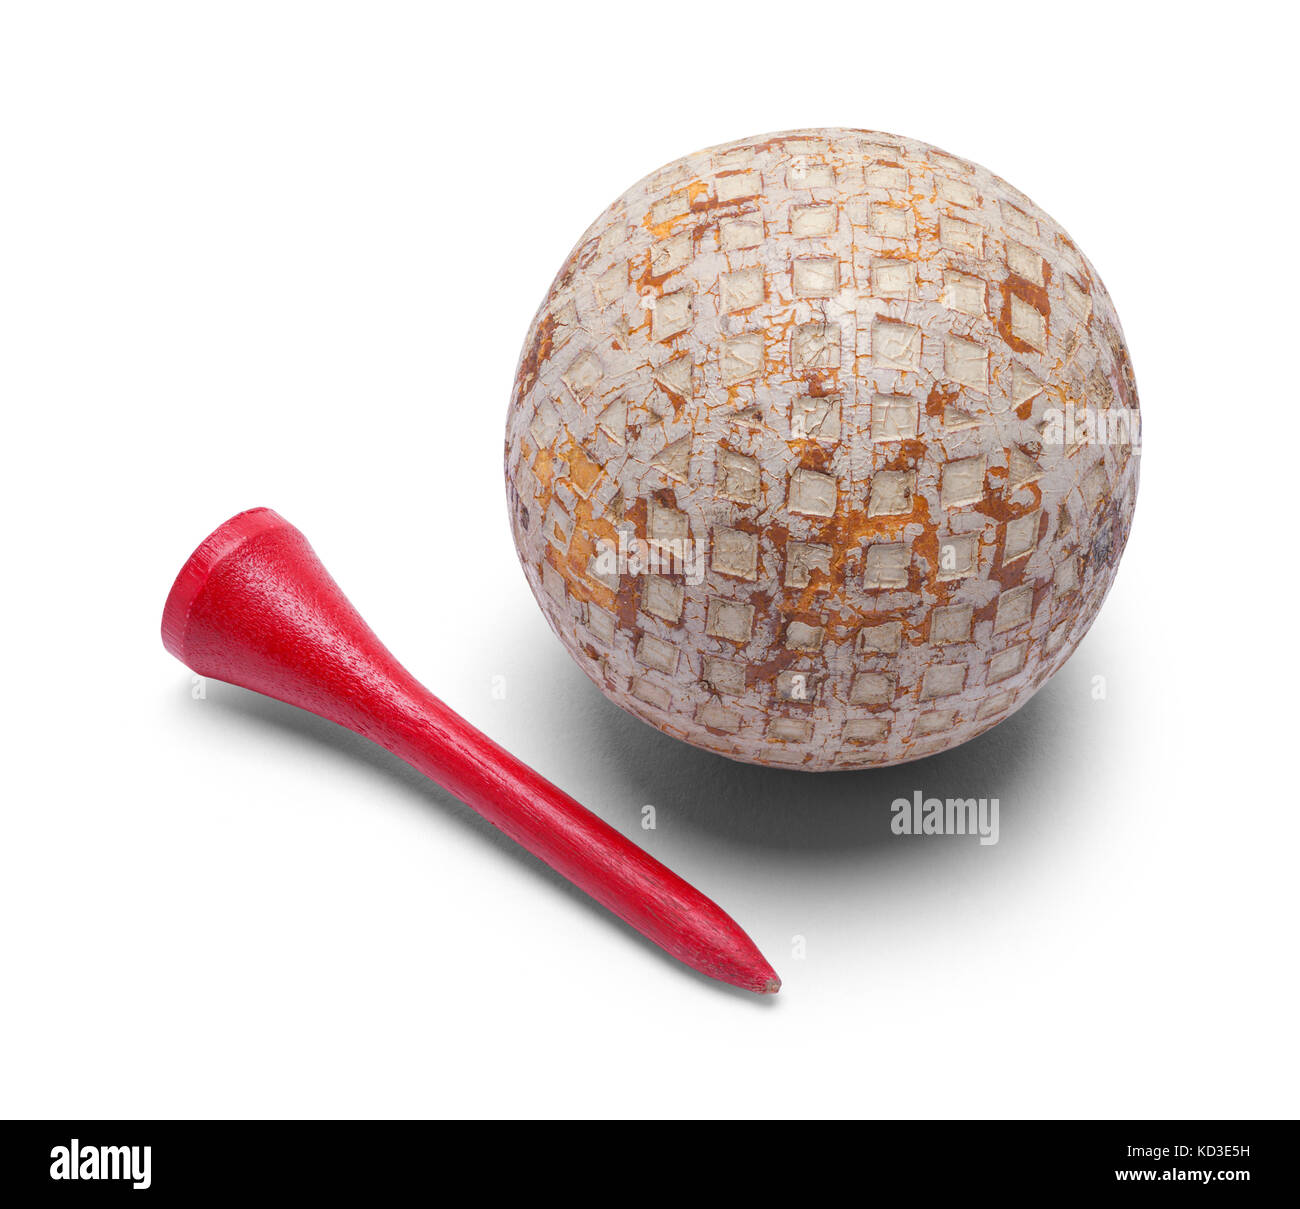 Old Golf Ball and Red Tee Isolated on a White Background. Stock Photo